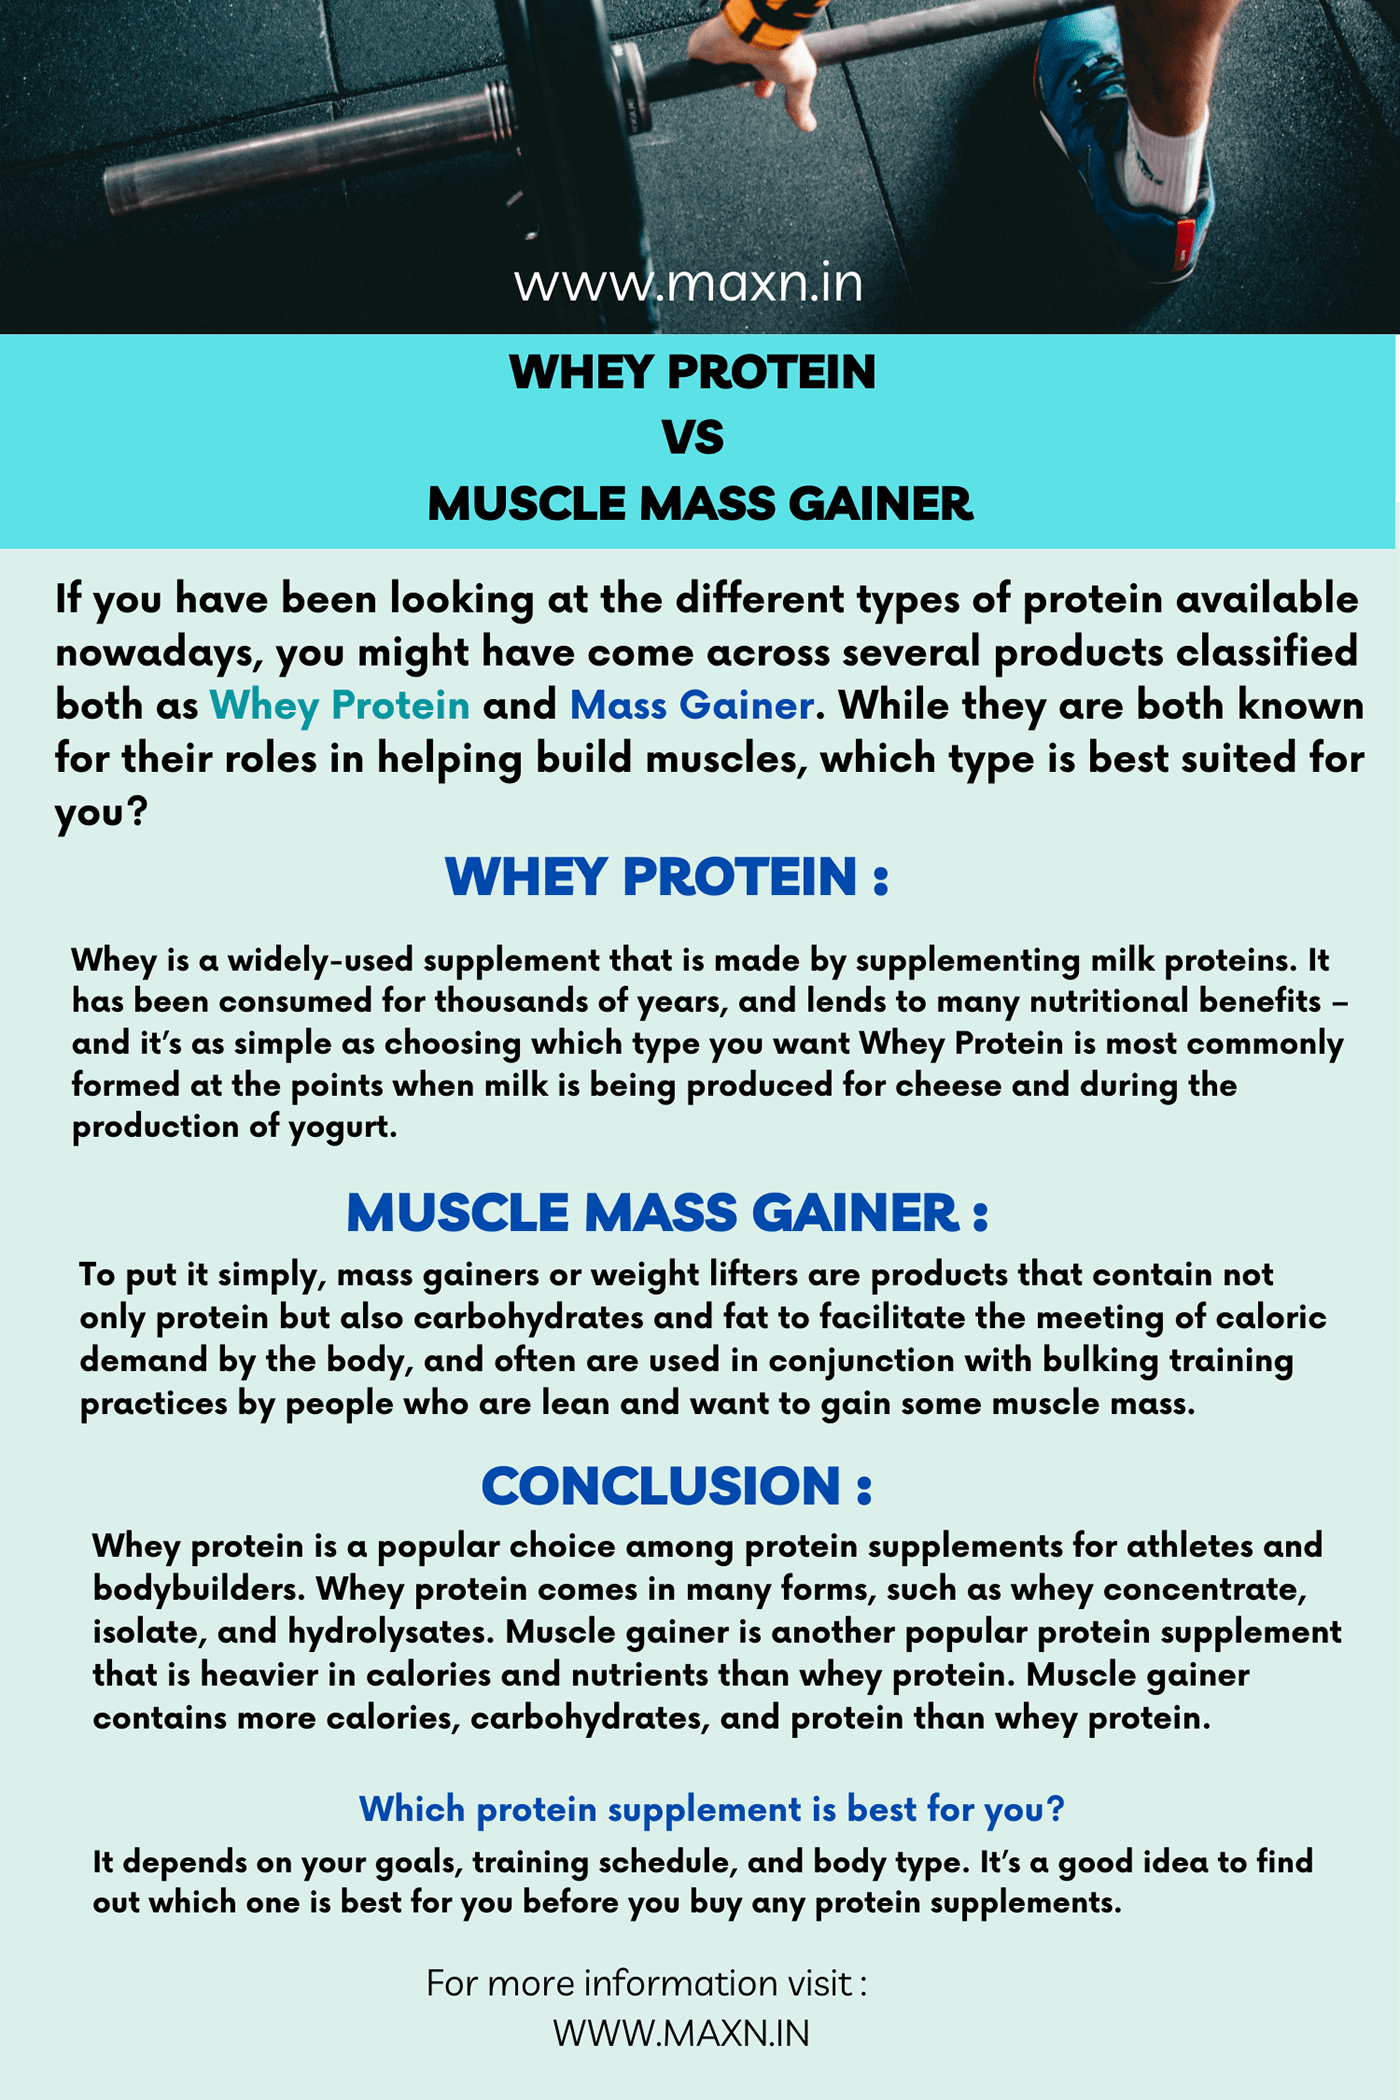  Whey Protein and Mass Gainer. While they are both known for their roles in helping build muscles, w